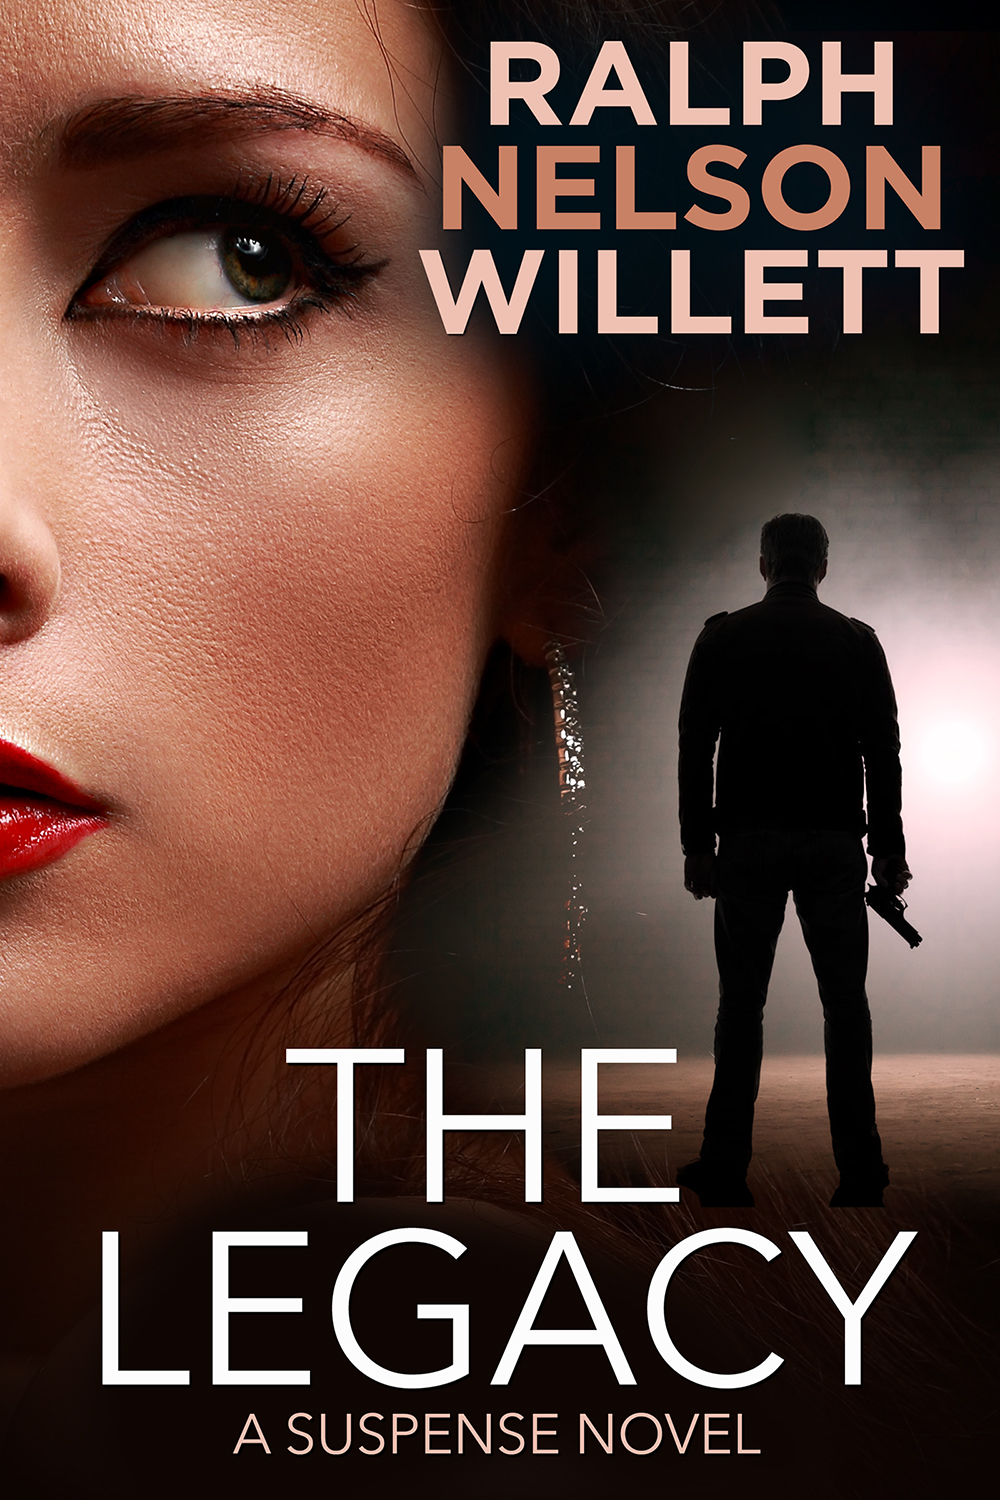 The Legacy is a dark Christian thriller. If you like tense plots, shocking twists, and determined heroes, then you’ll love Ralph Nelson Willett’s captivating novel.